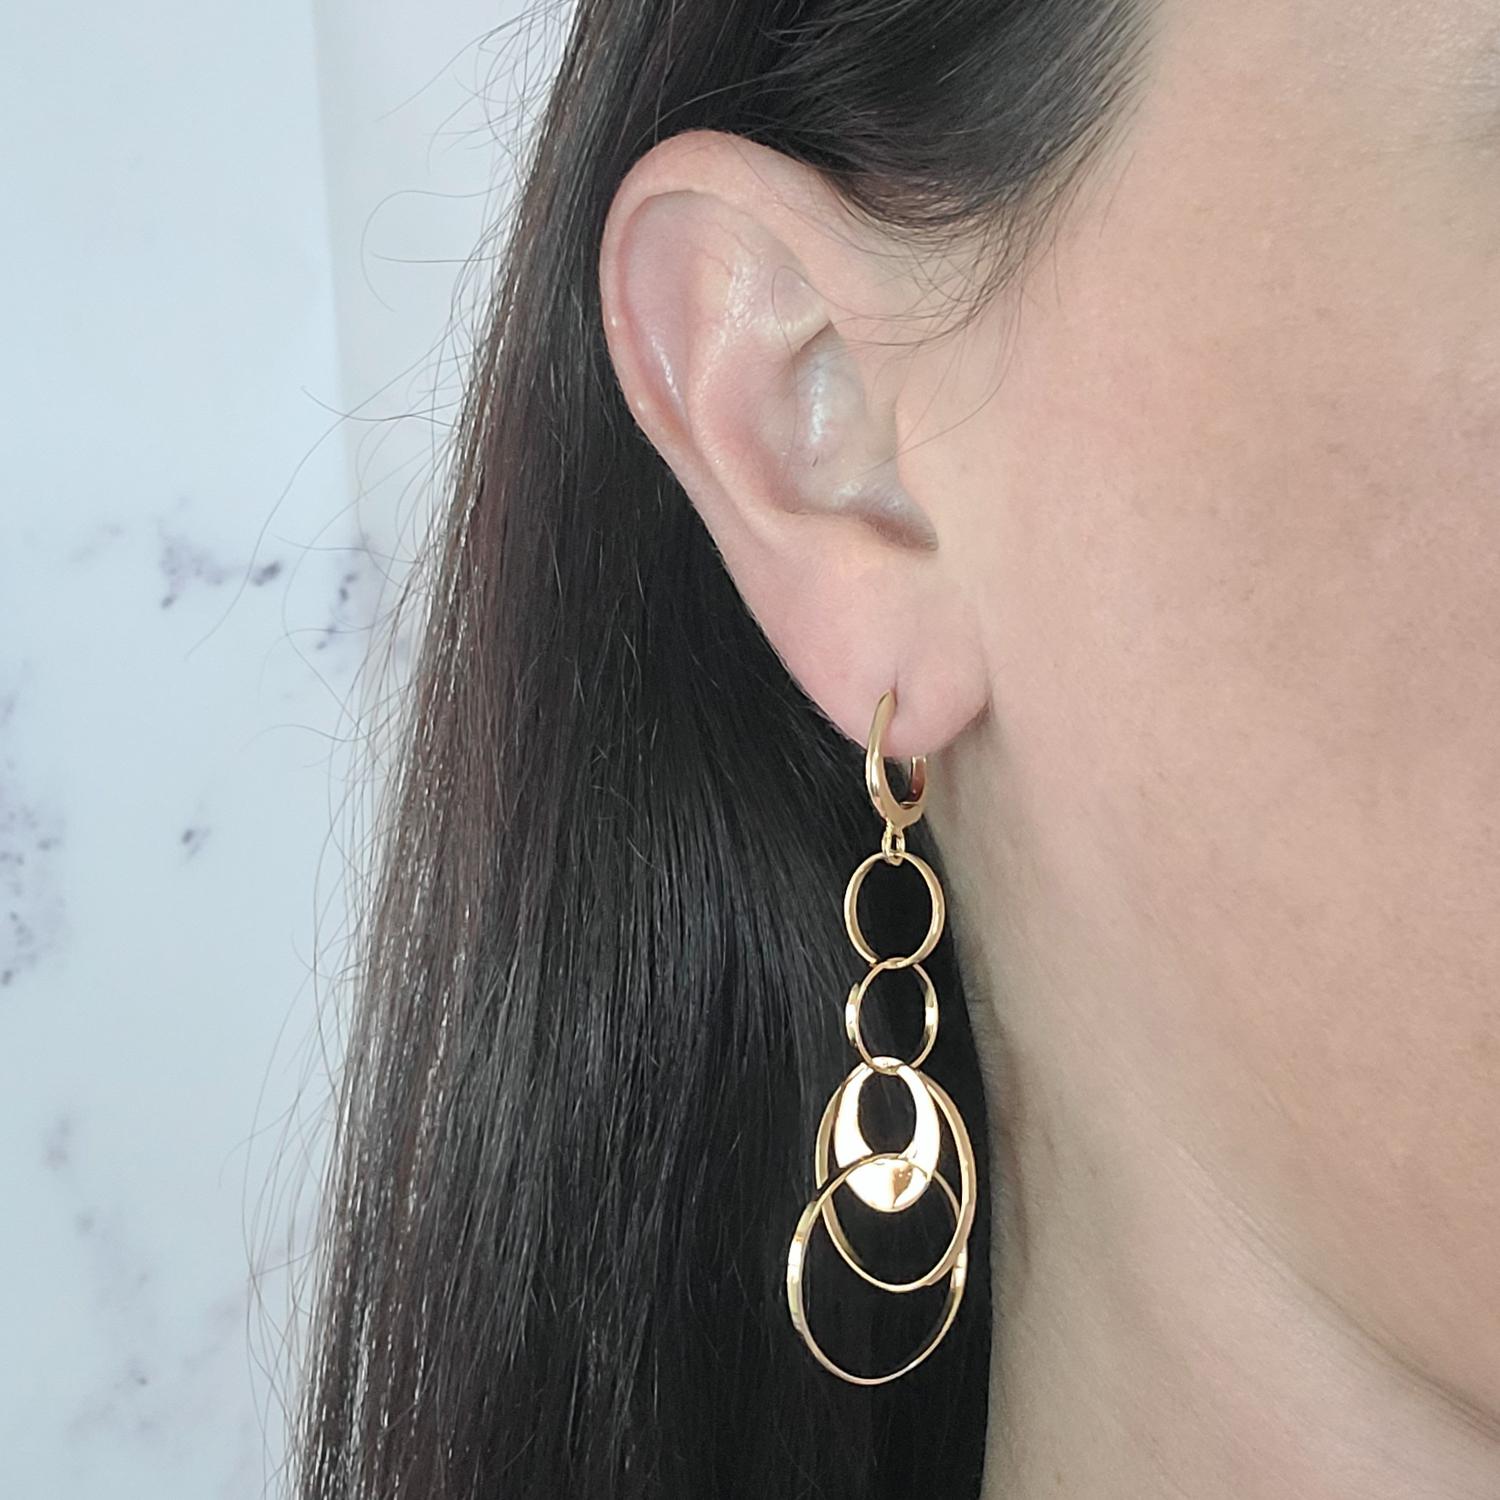 18 Karat Yellow Gold Dangle Disc Earrings Featuring A Huggie Hoop Top. Pierced Post with Hinged Closure. 2.5 Inches Long. Finished Weight Is 7.5 Grams.